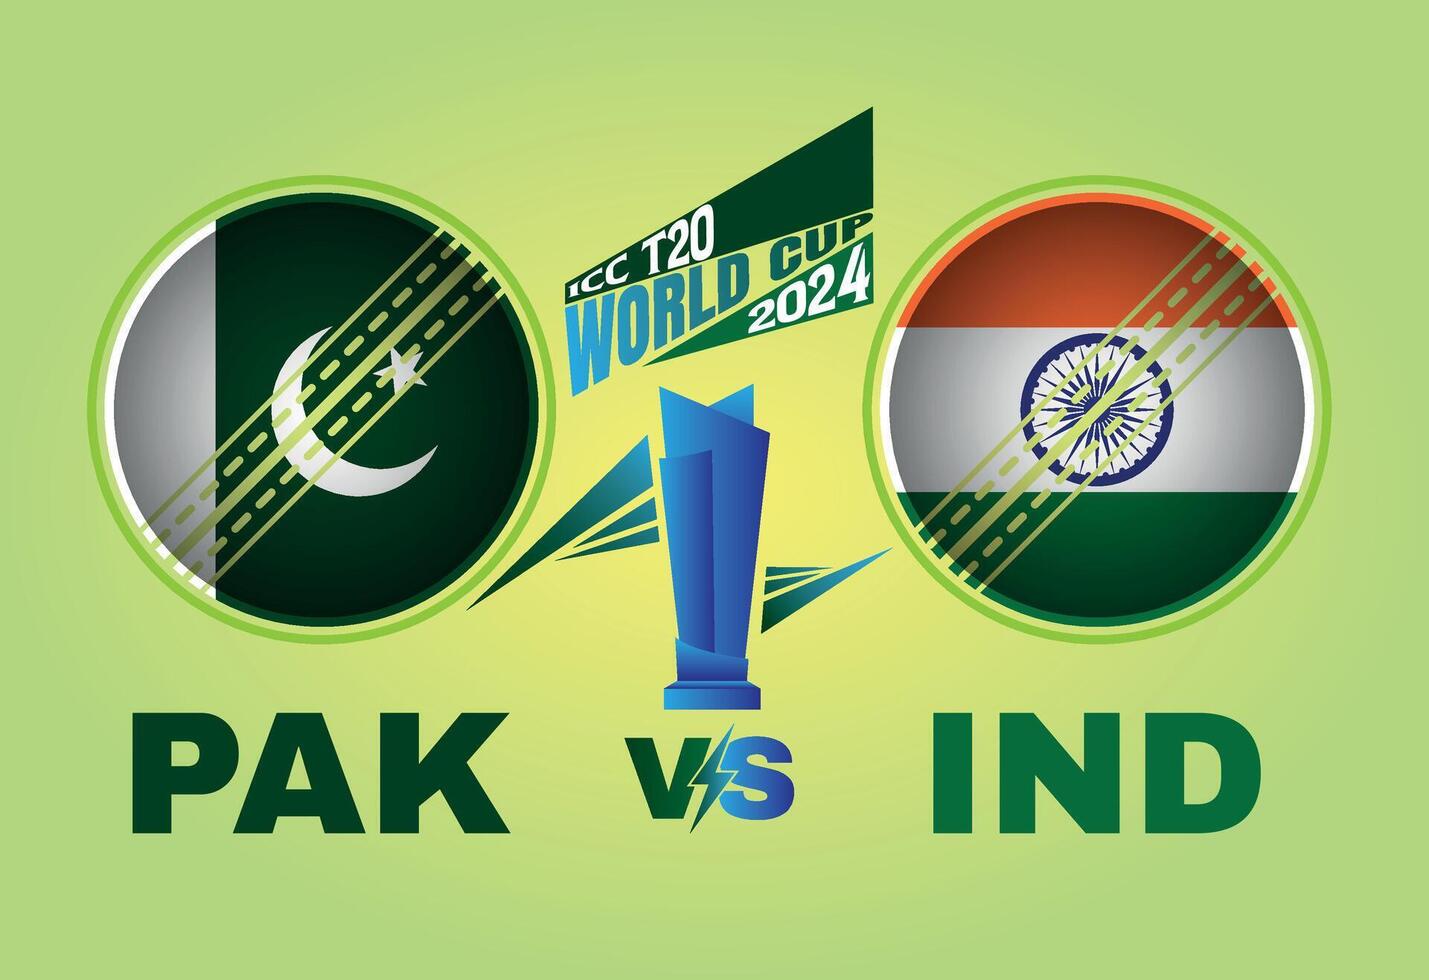 Pakistan vs India Cricket Match concept with flag and cricket ball. Creative illustration of participant countries flags with gradient background. Pakistan vs India Cricket Match Social Media Post. vector